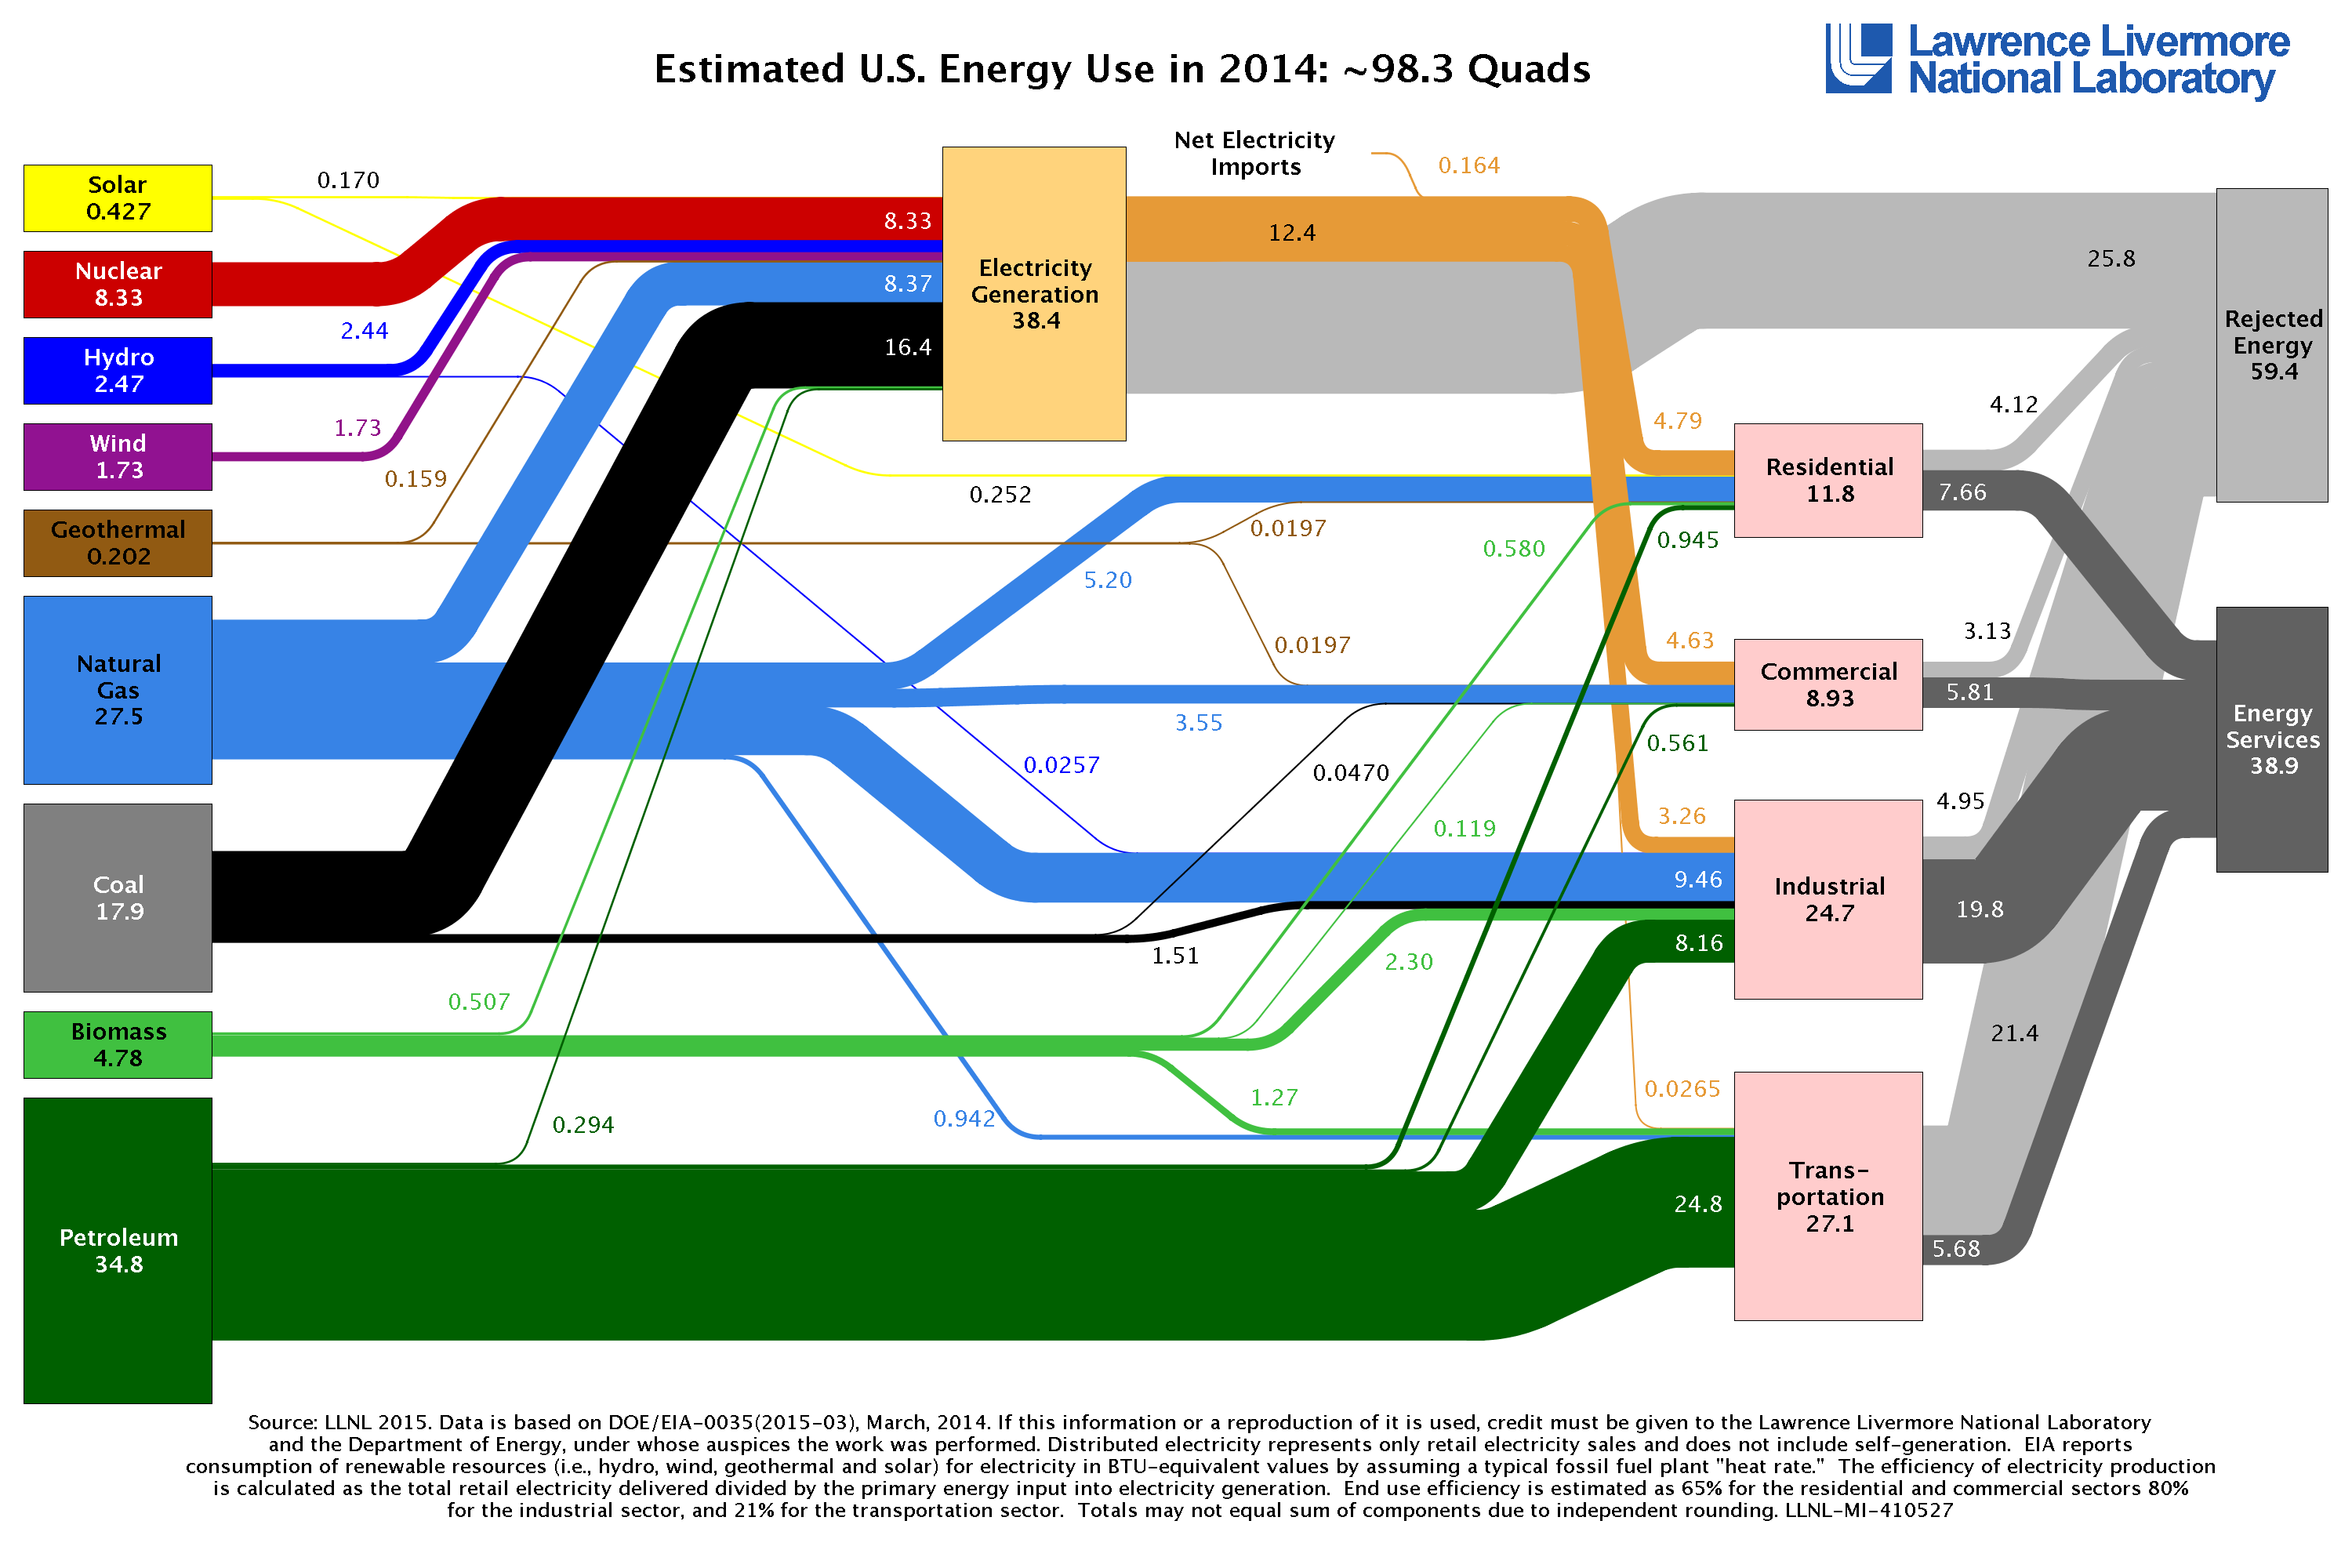 Annual Energy Usage in the United States